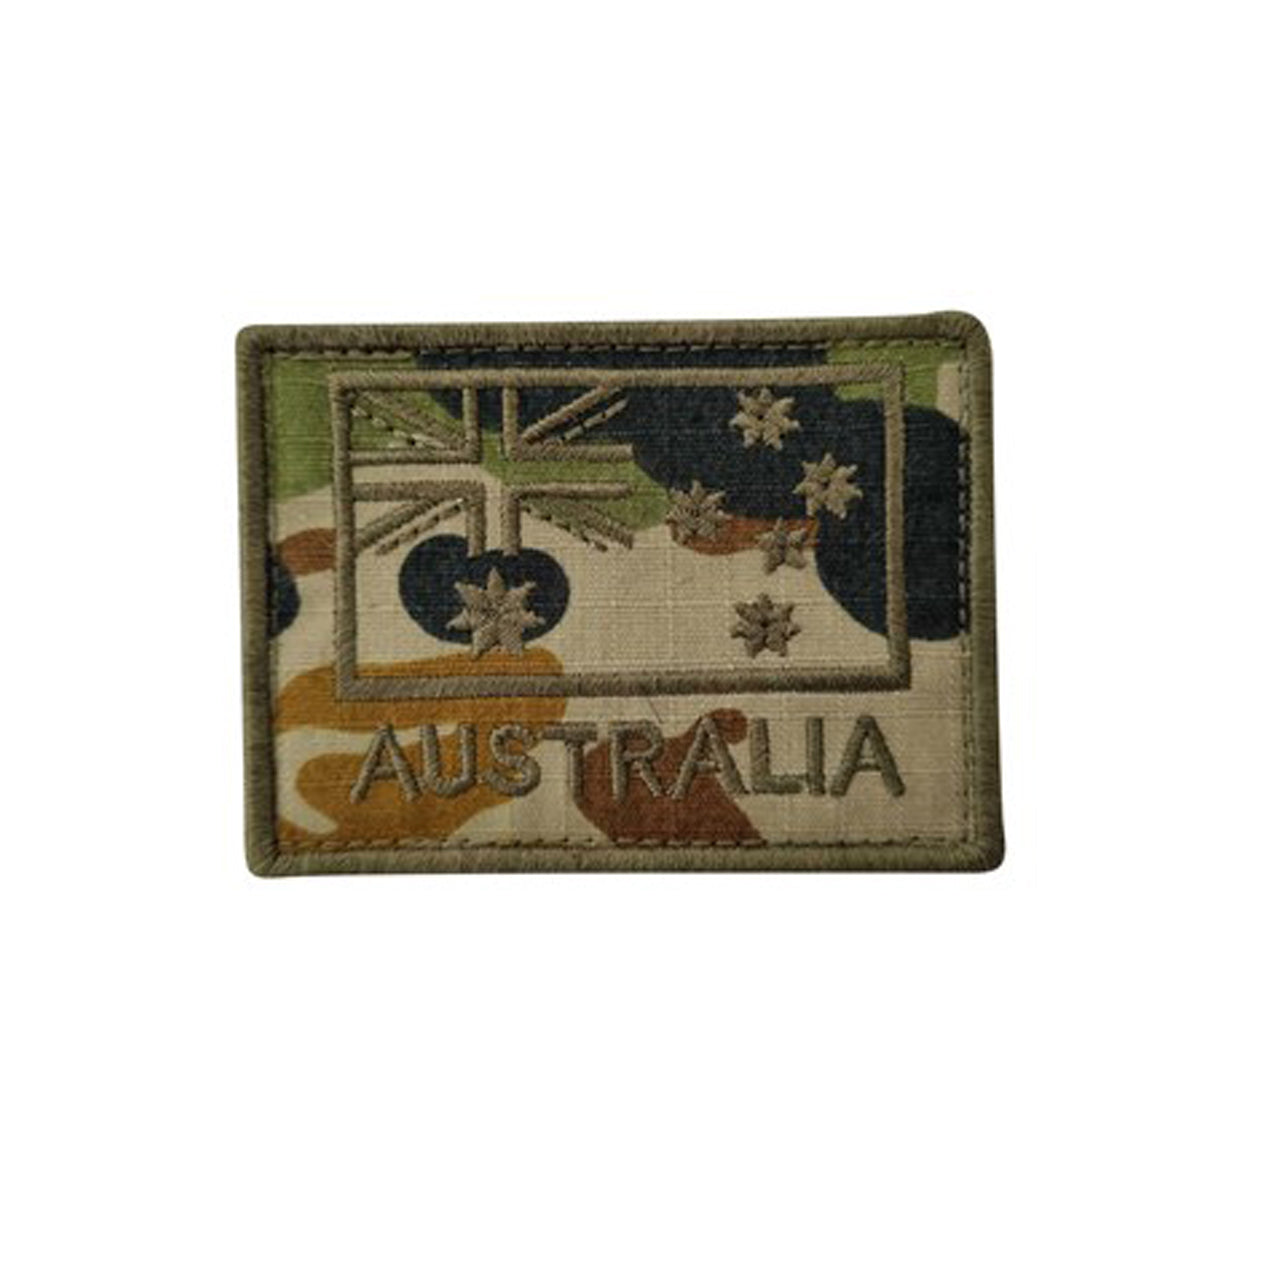 Australian National Flag Patch ANF  Please note this is not genuine AMCU fabric  Size: 7cm x 5cm